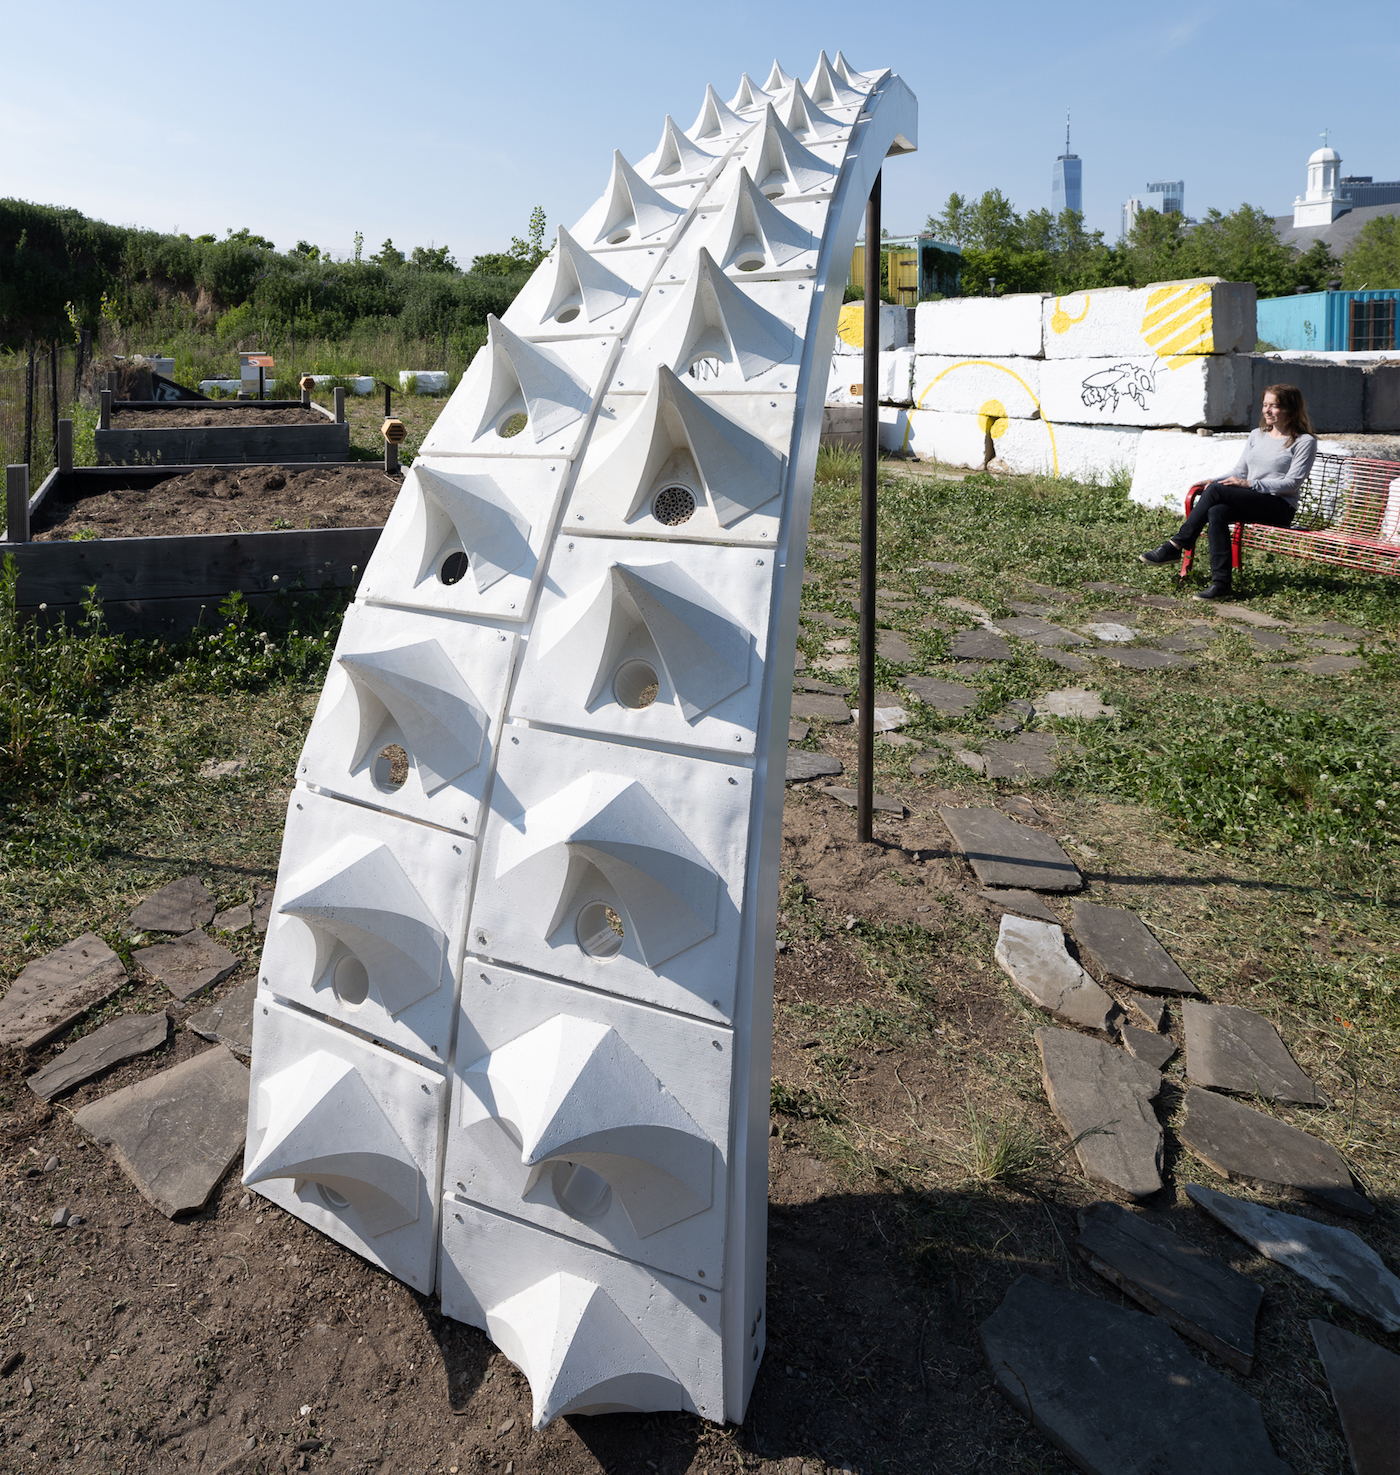 A “slice” of Harrison Atelier’s Pollinators Pavilion at the Bee Conservancy on Governors Island (photo by Adam Elstein)